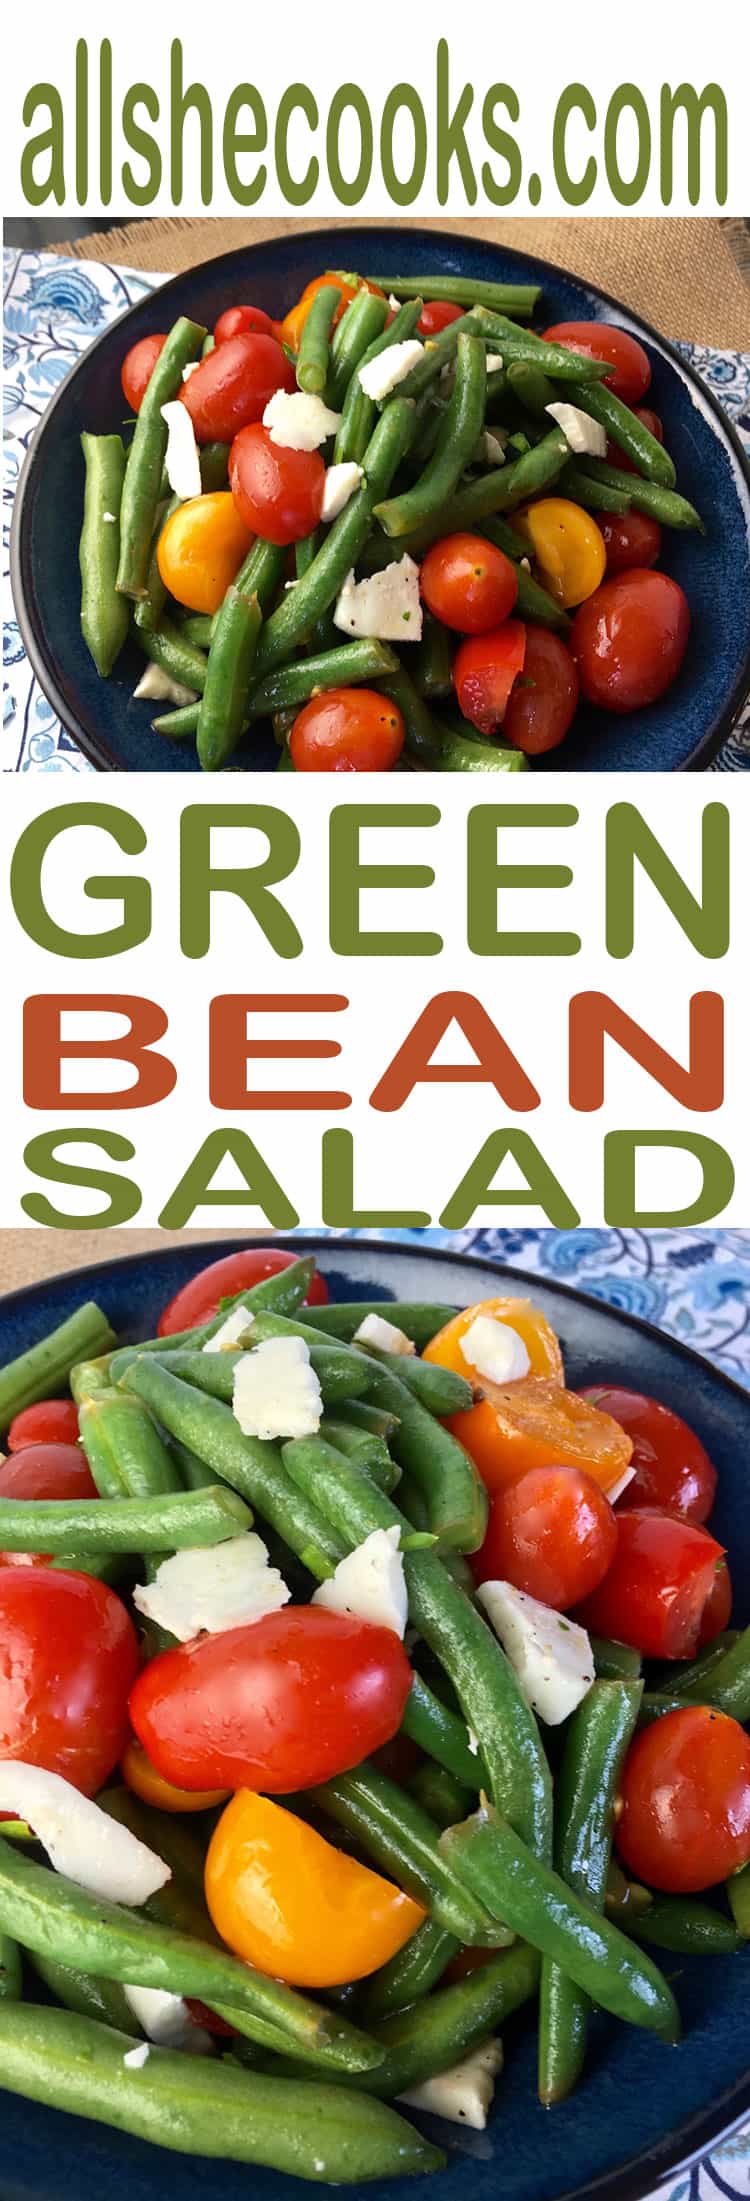 Looking for a new salad to serve for dinner? This Green Bean Salad is the perfect side dish. Full of green beans, heirloom cherry tomatoes and feta cheese...this salad is sure to be a hit.